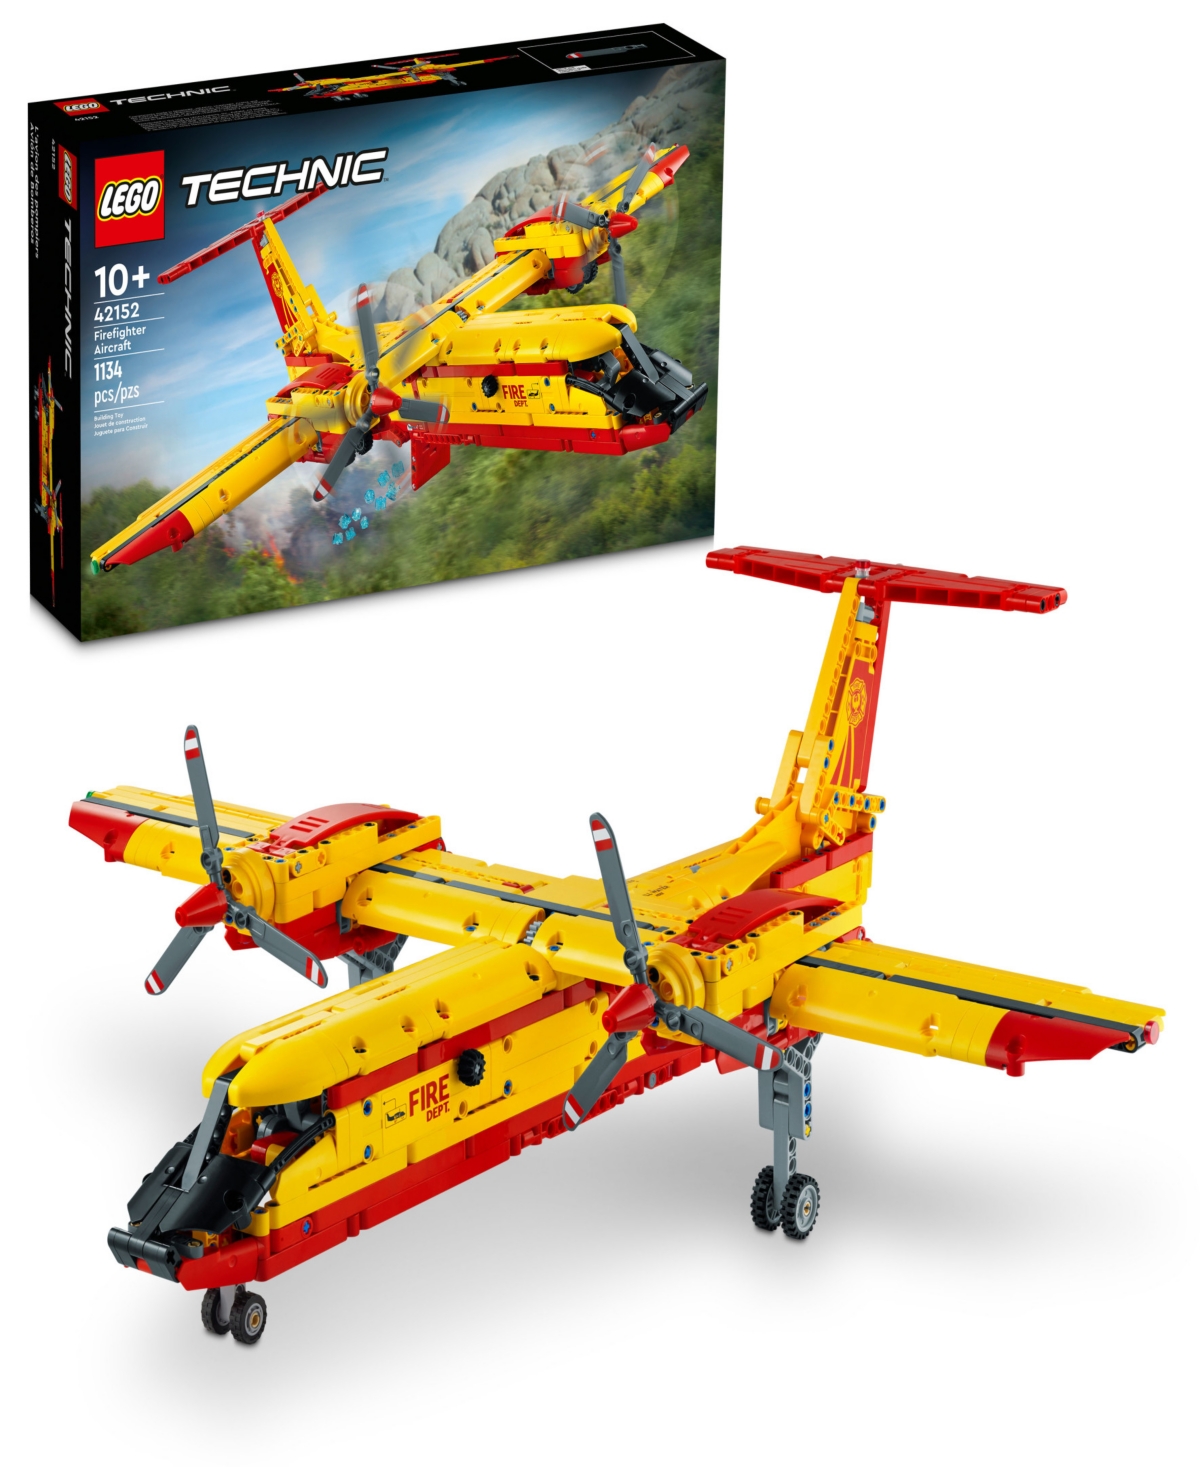 Lego Technic 42152 Firefighter Aircraft Toy Building Set In Multicolor